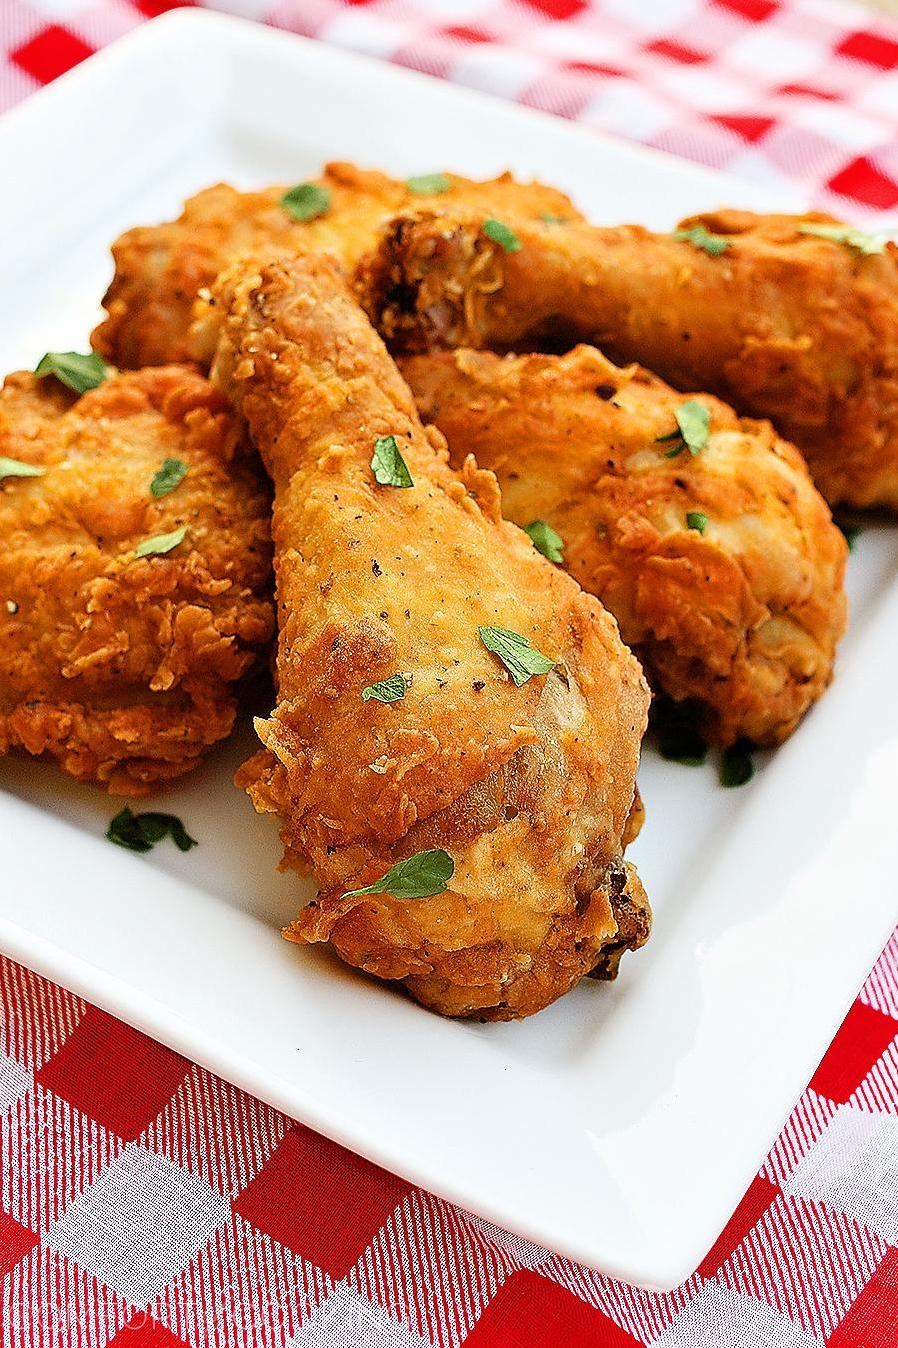 Delicious Southern Fried Chicken Recipe – Easy & Flavorful